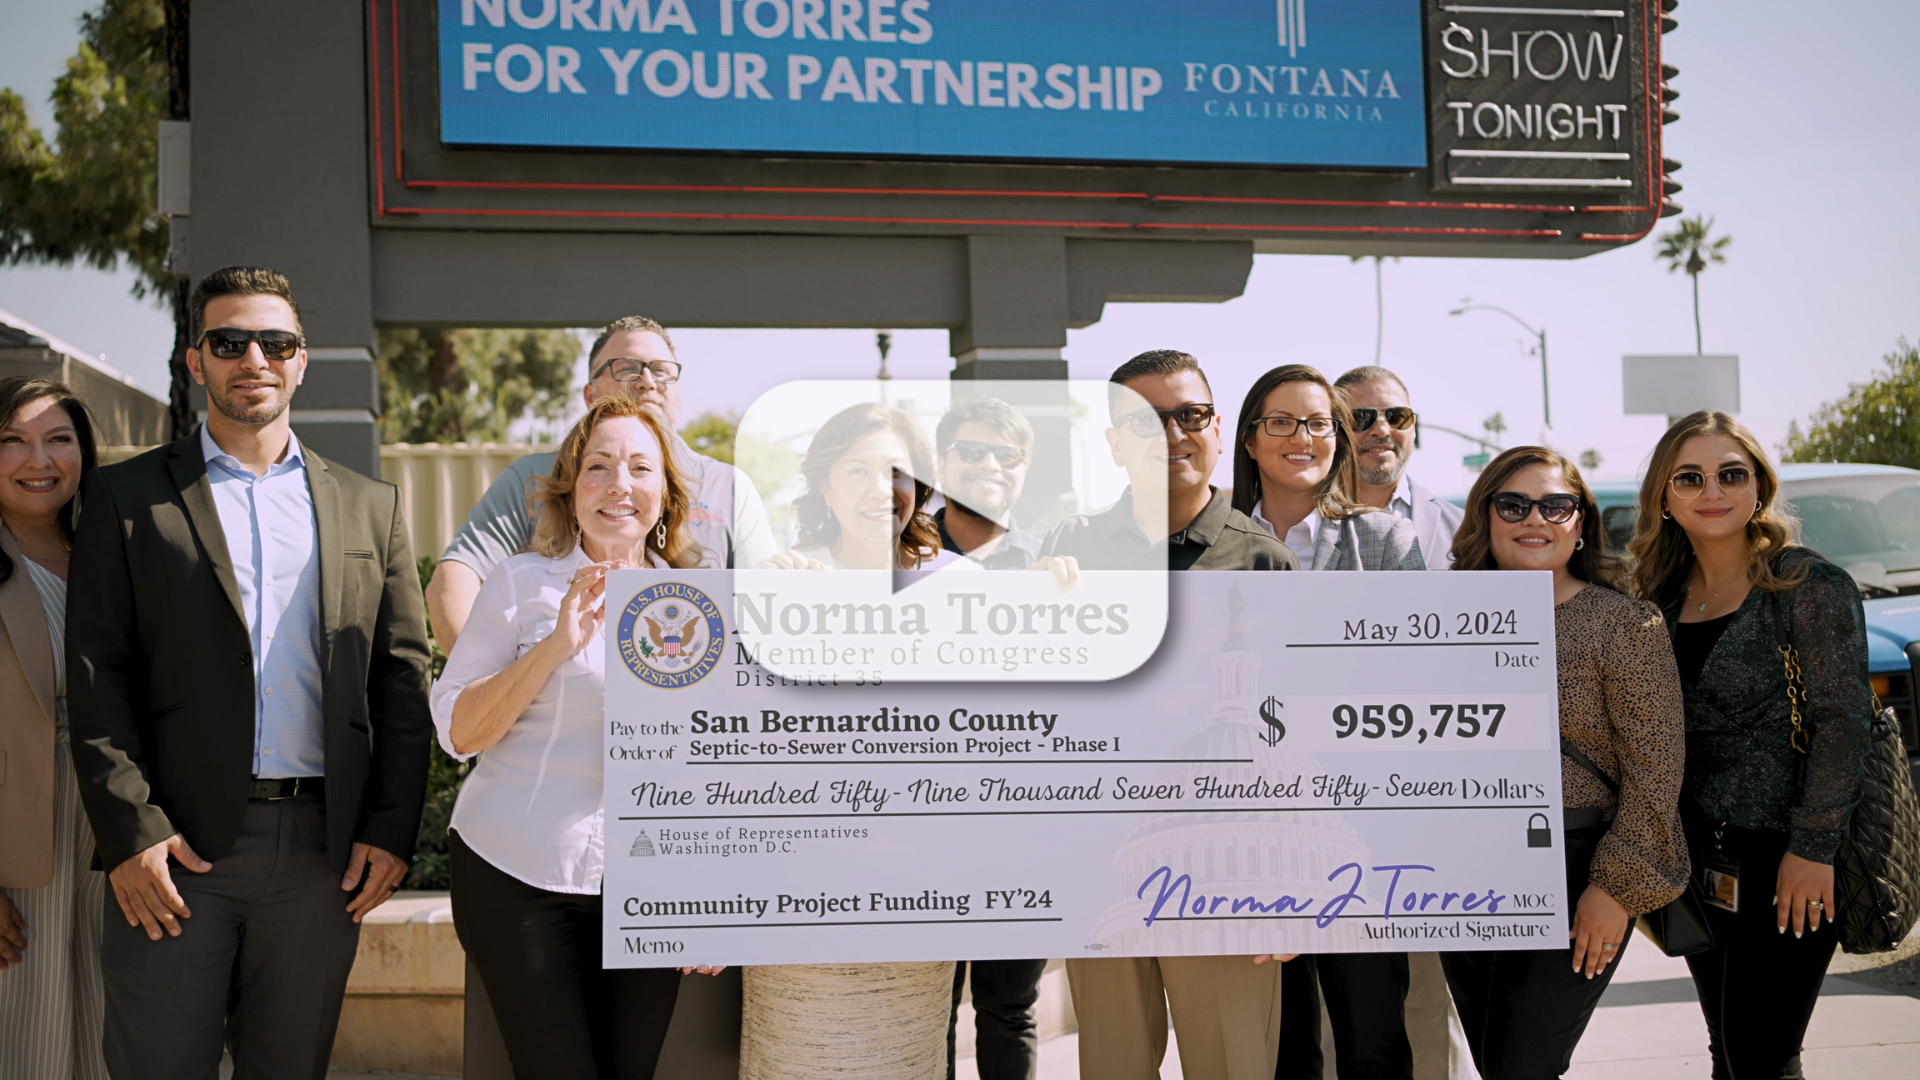 A group of elected officials from Fontana, San Bernardino County and Congressmember Norma Torres holding a large check for $959,757.